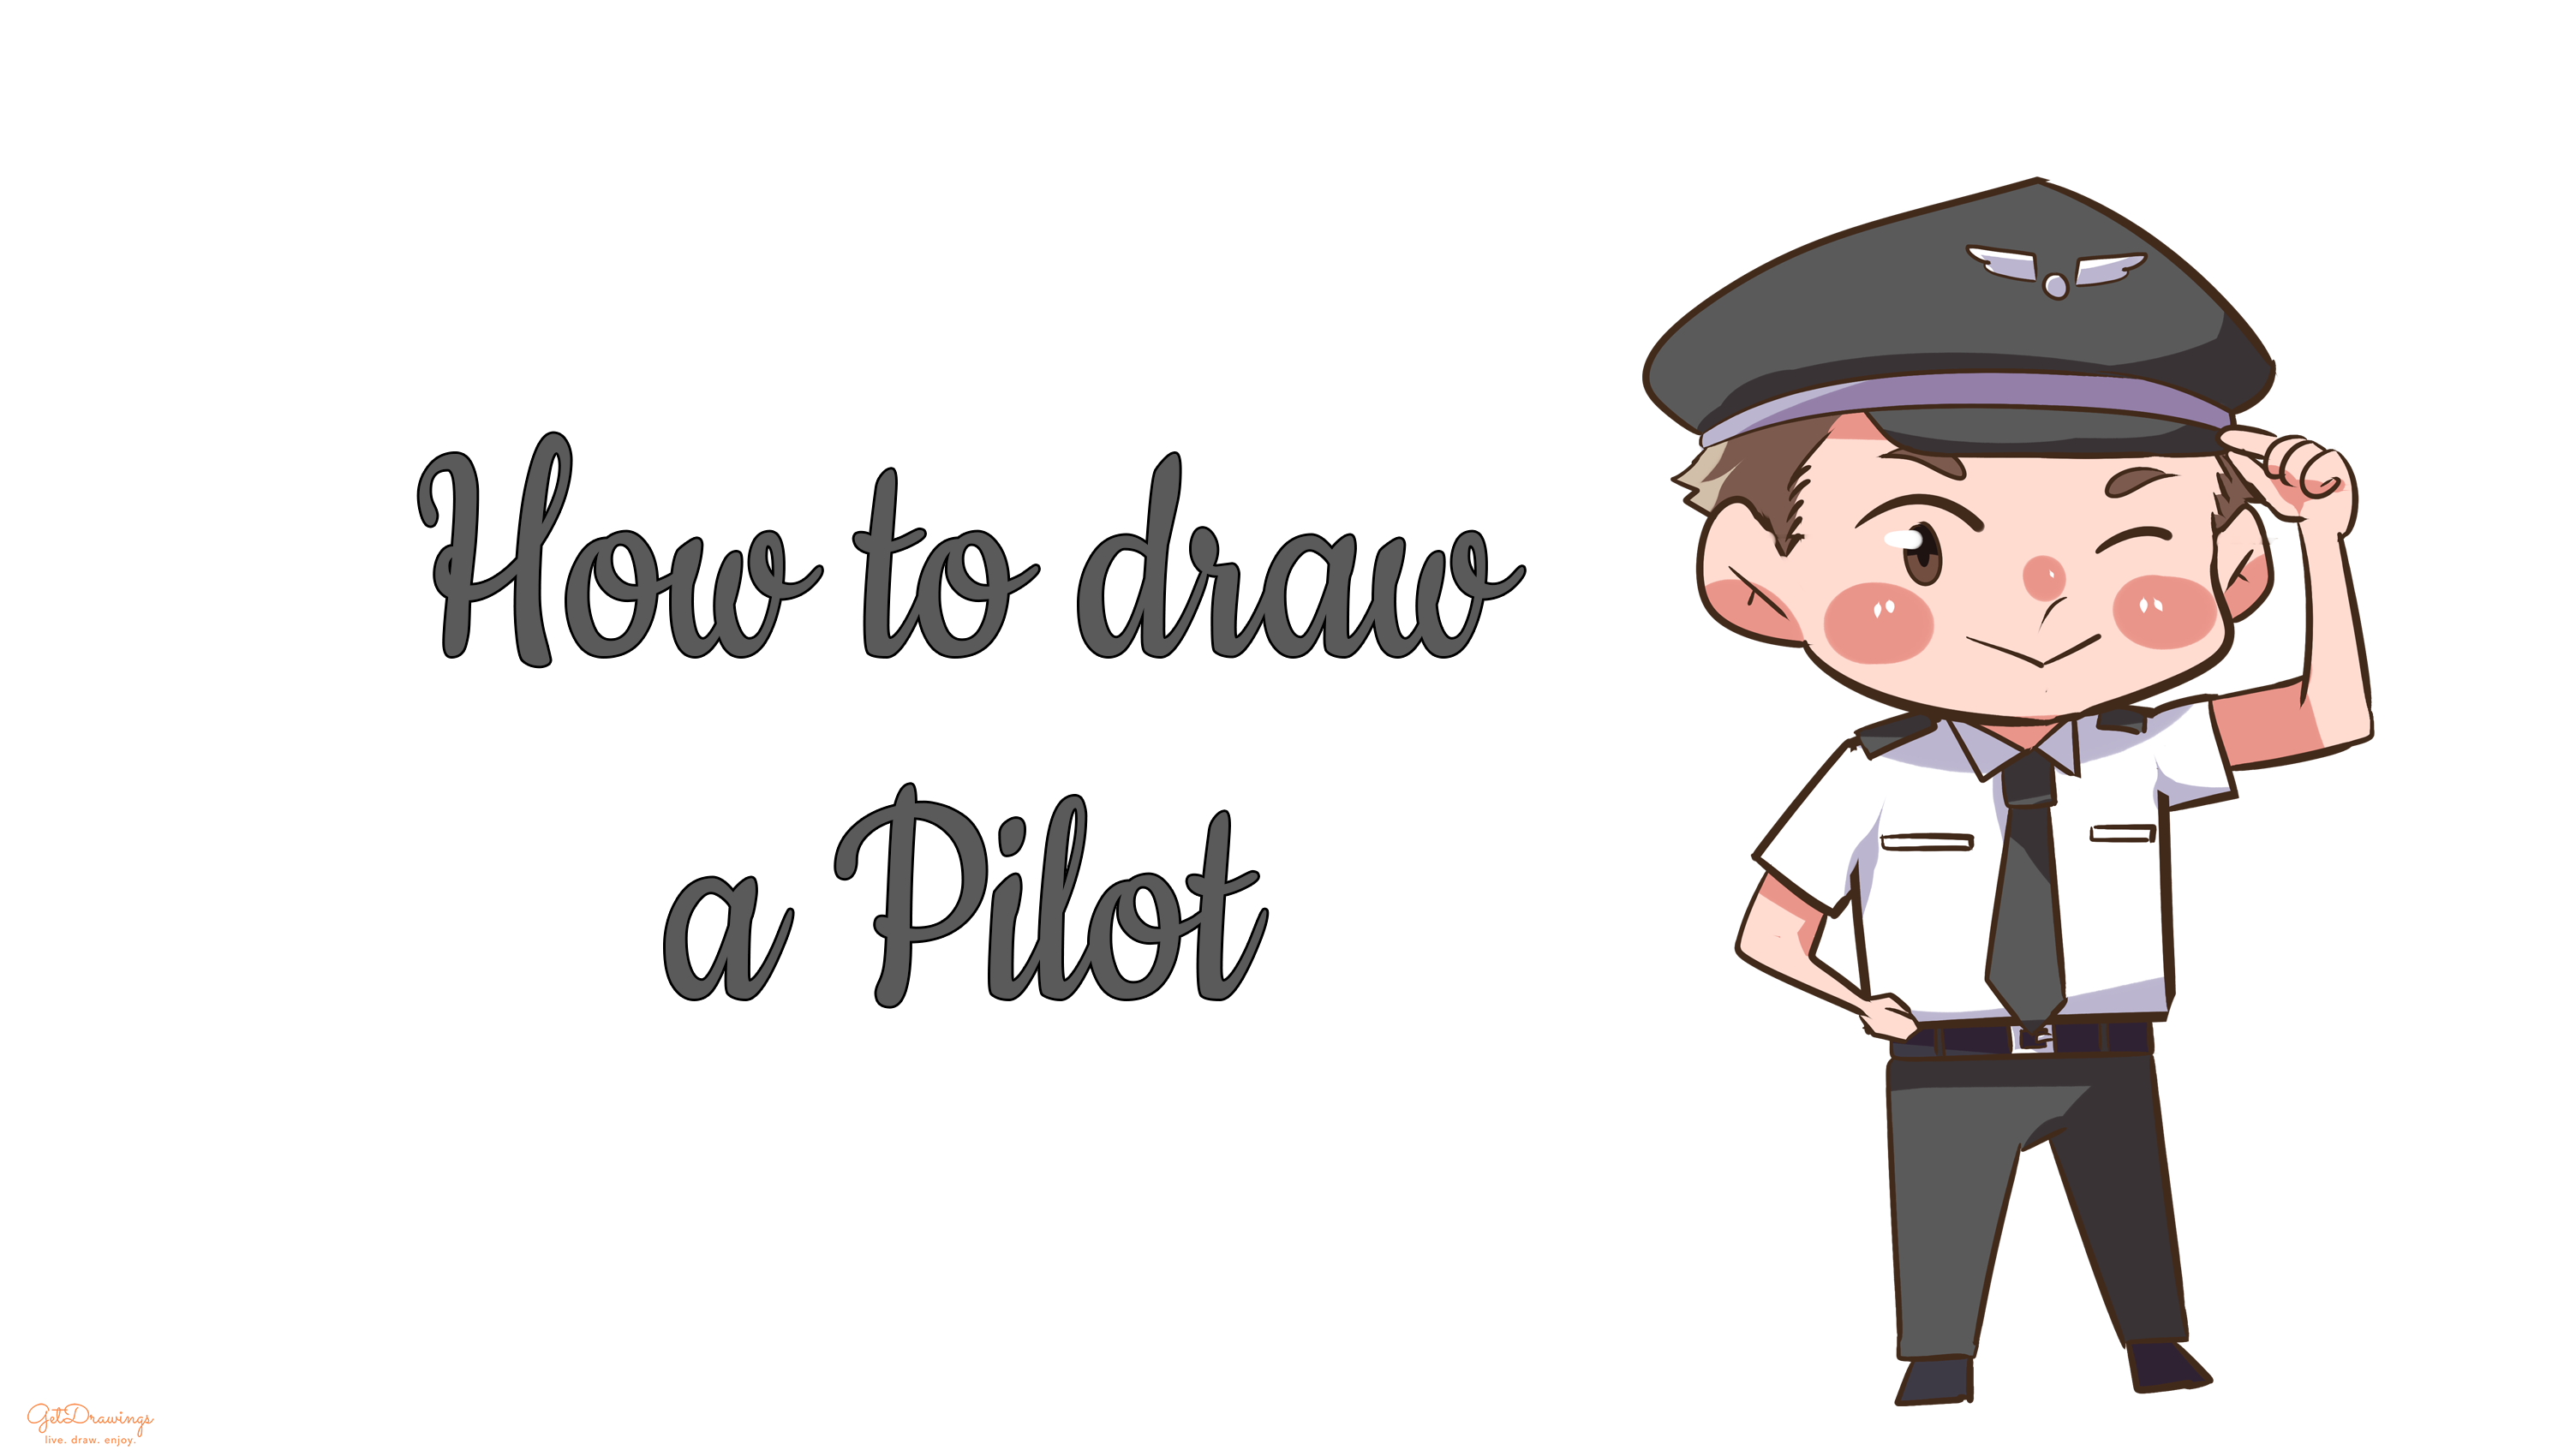 How to draw a Pilot?